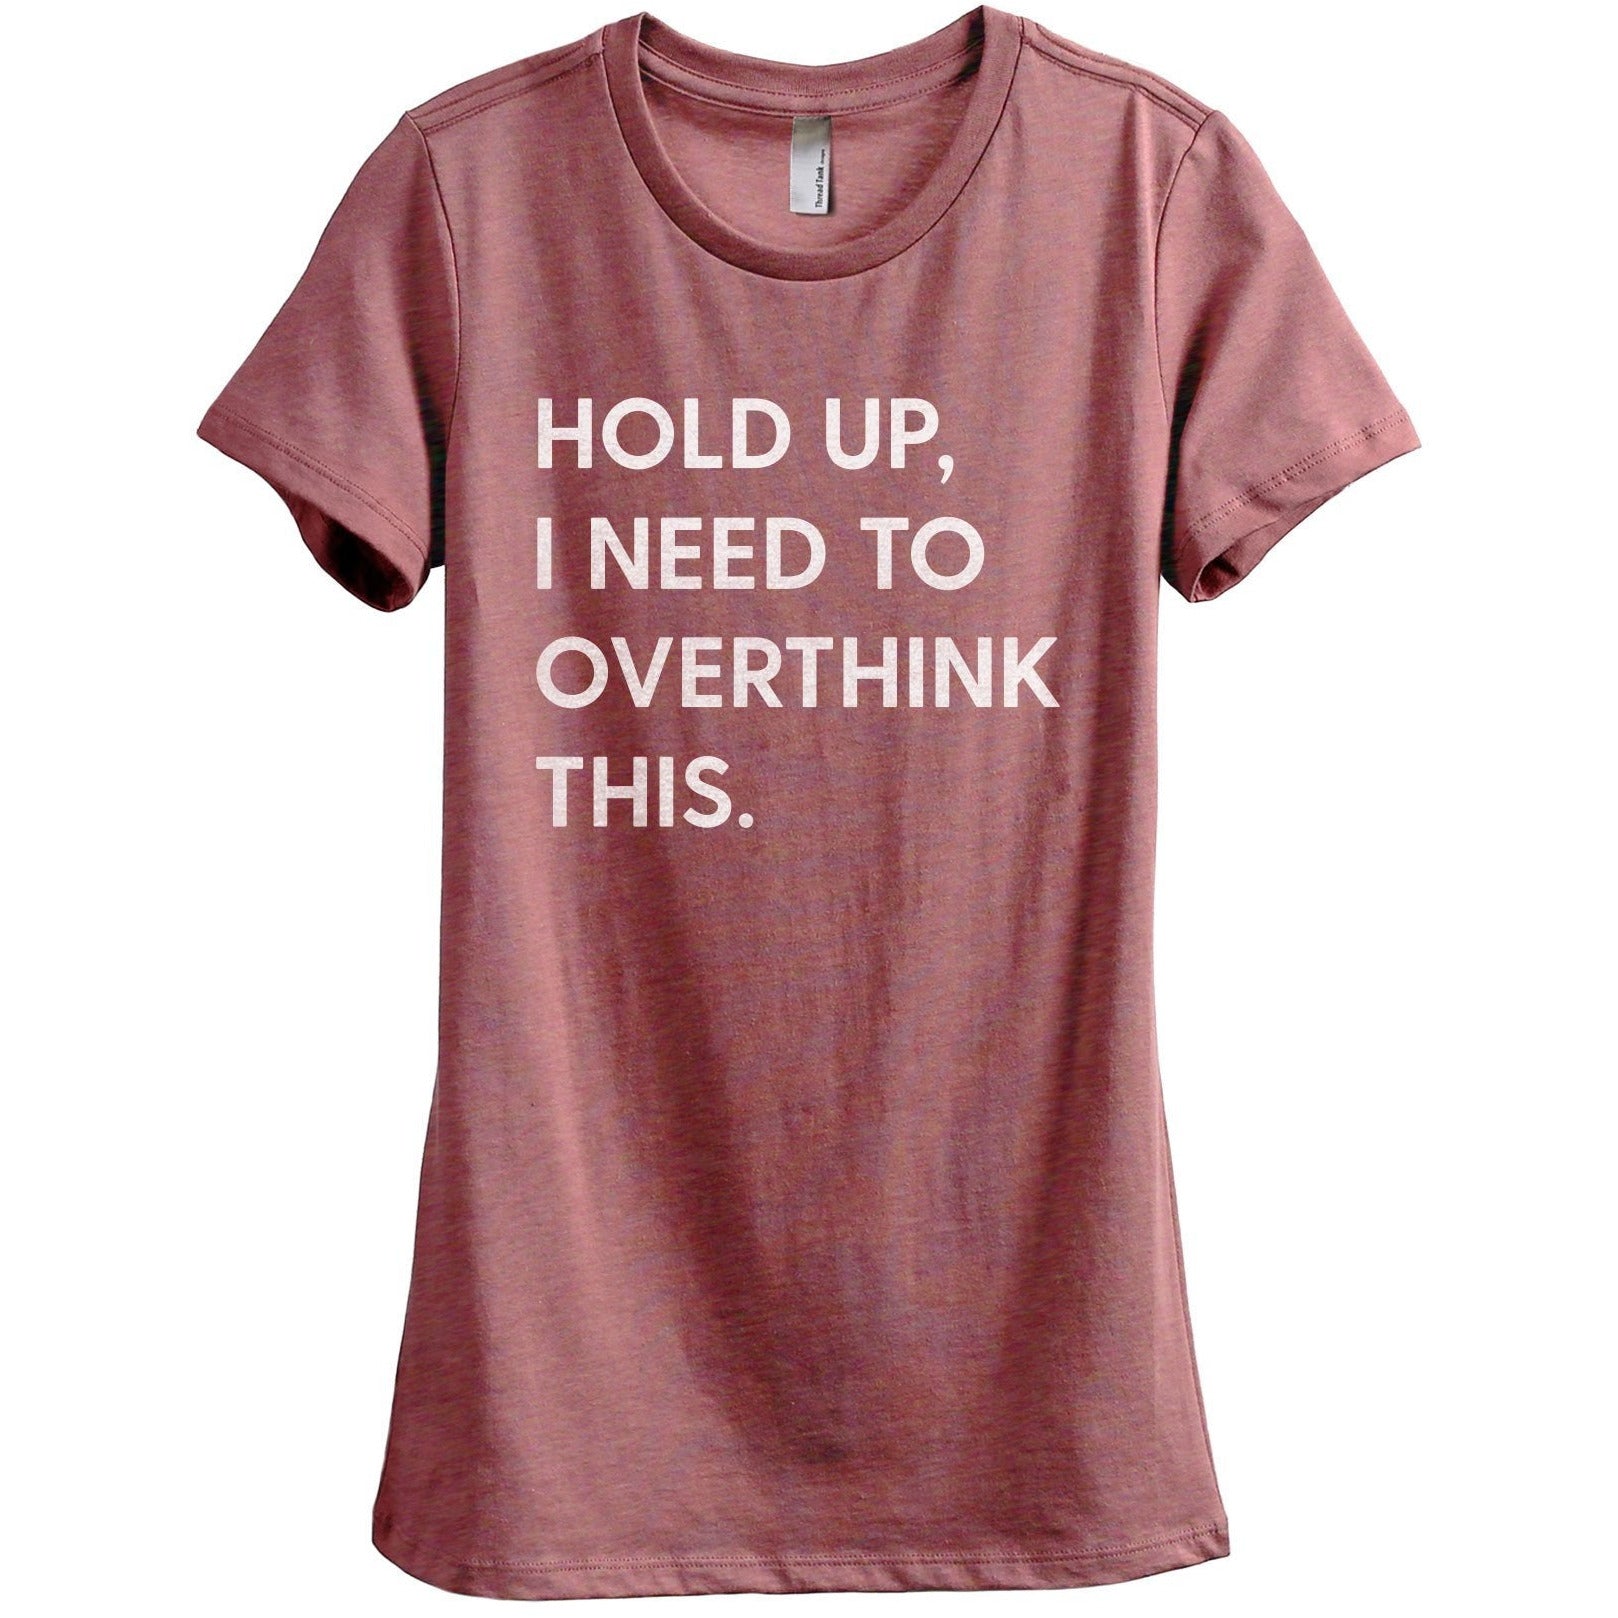 Hold Up, I Need To Rethink This Women's Relaxed Crewneck T-Shirt Top Tee Heather Rouge